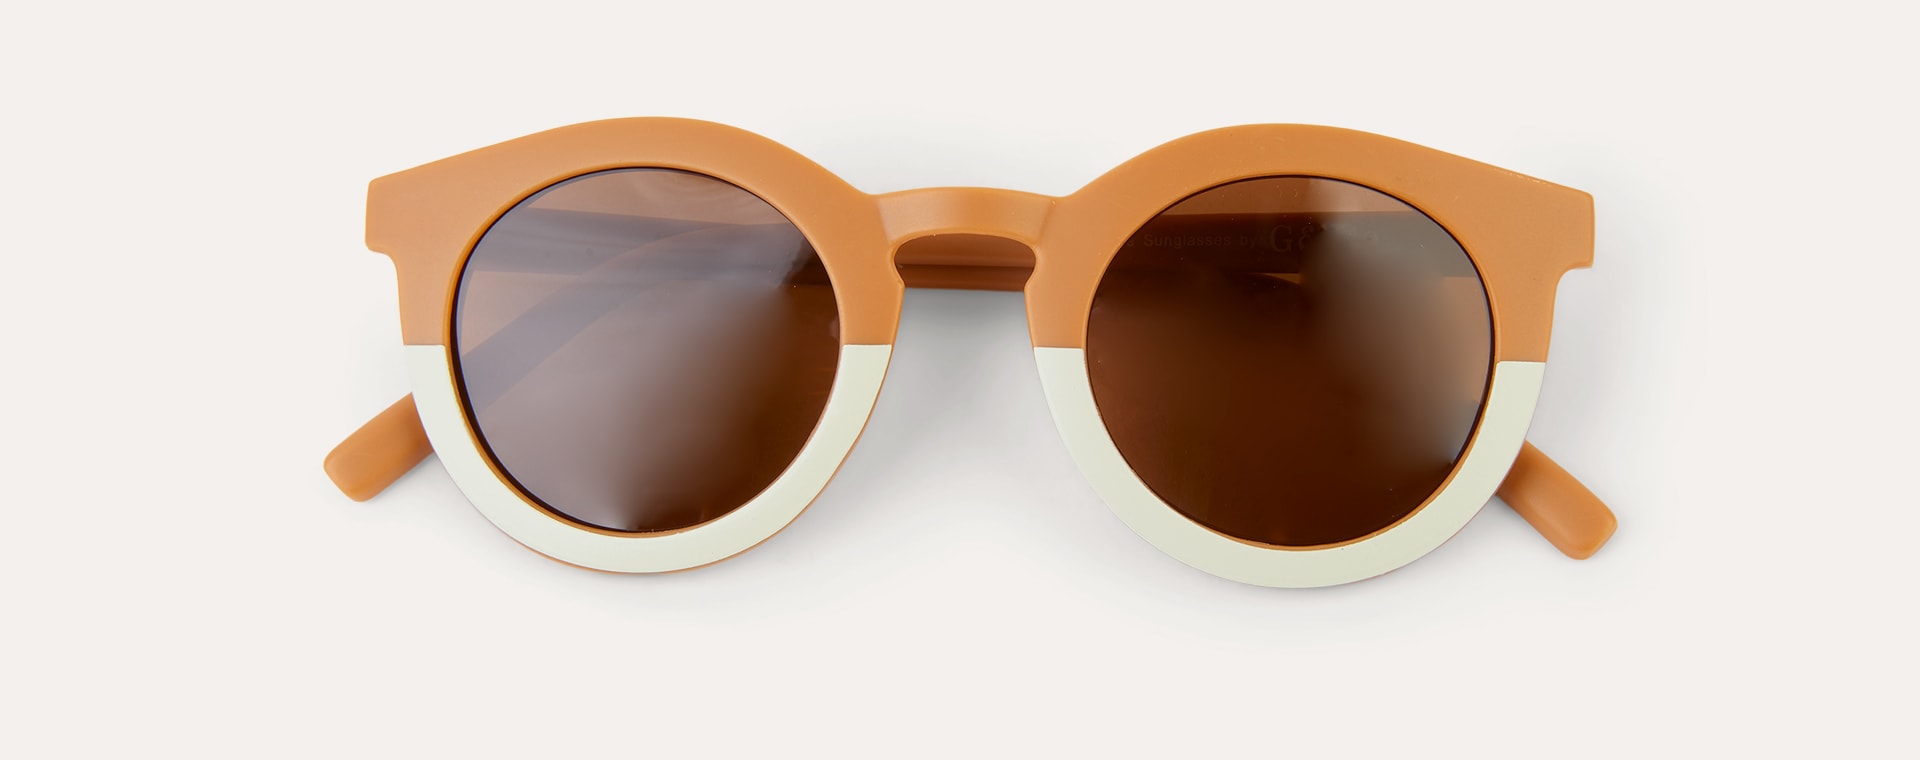 Spice+Buff Grech & Co New Sustainable Sunglasses